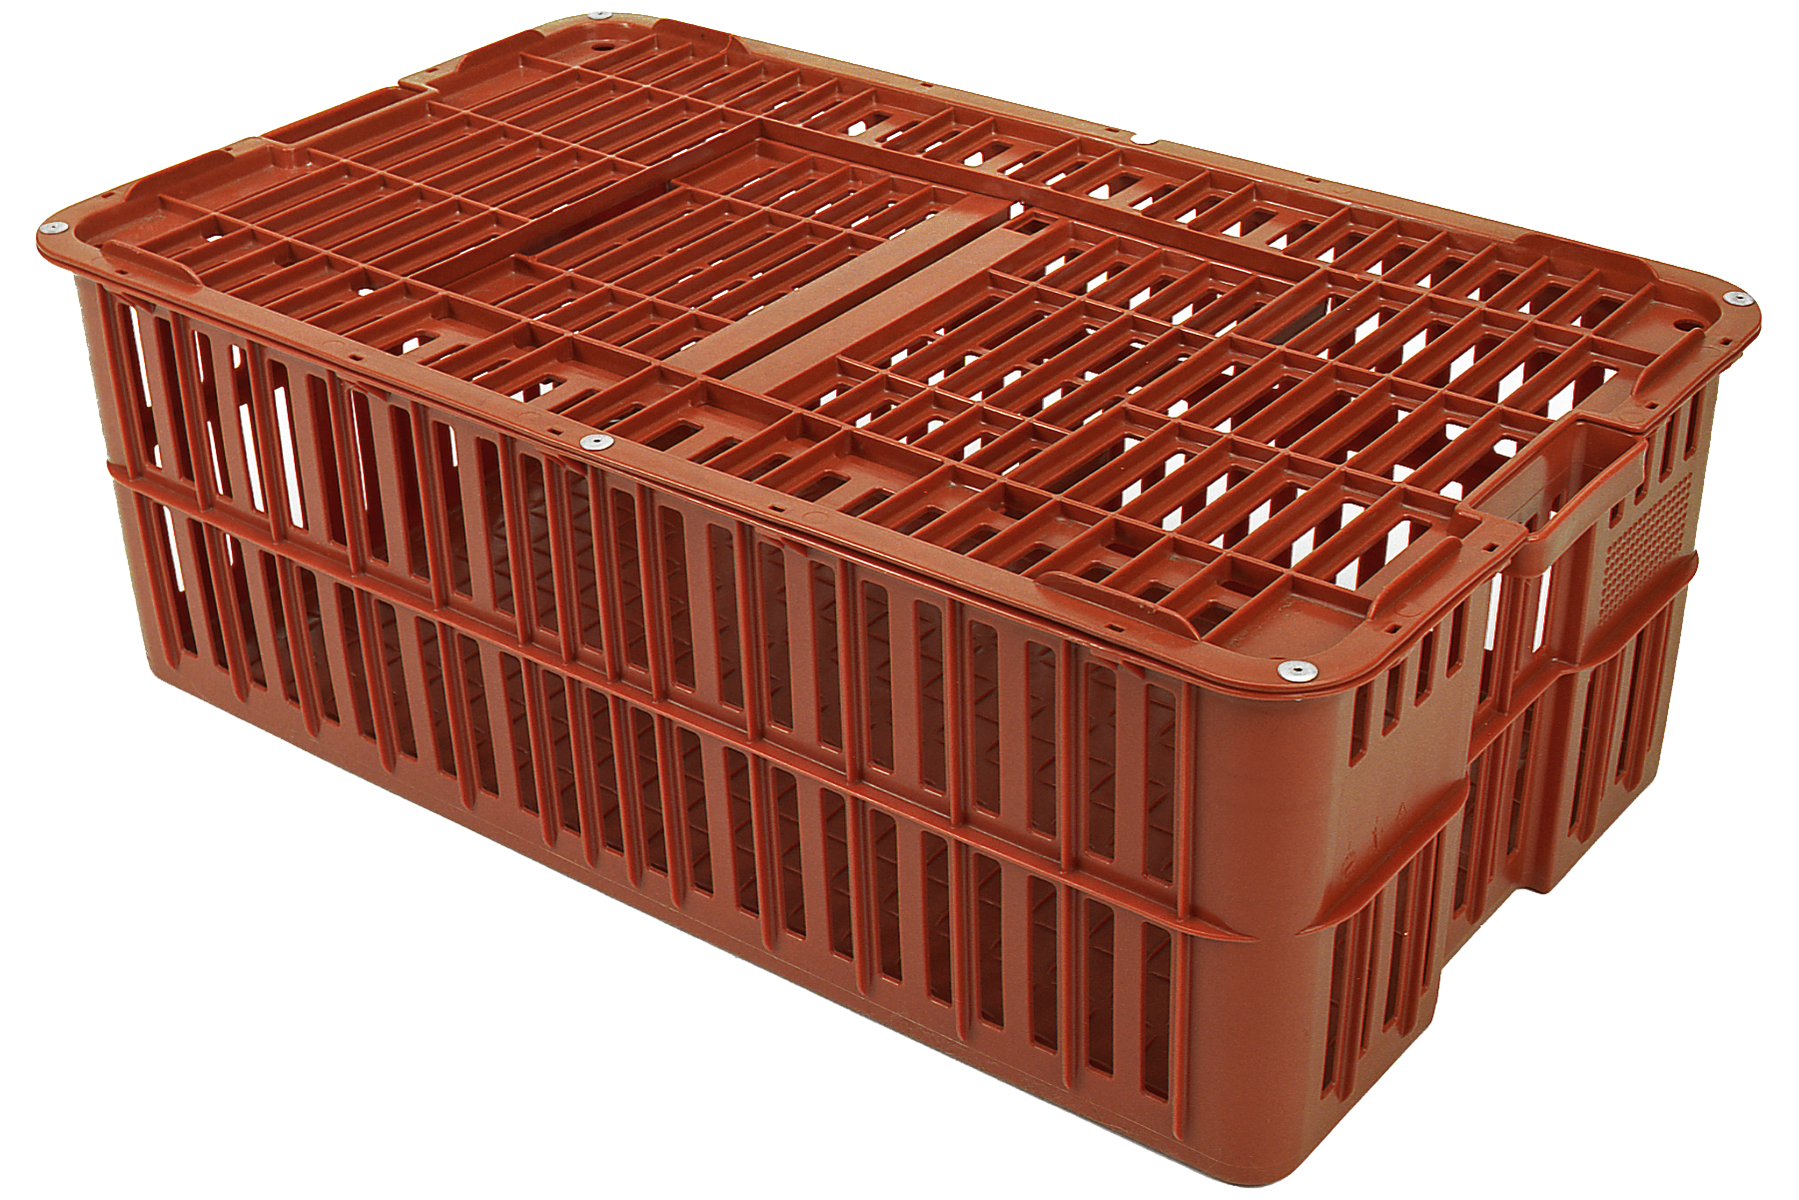 Poultry transport crates